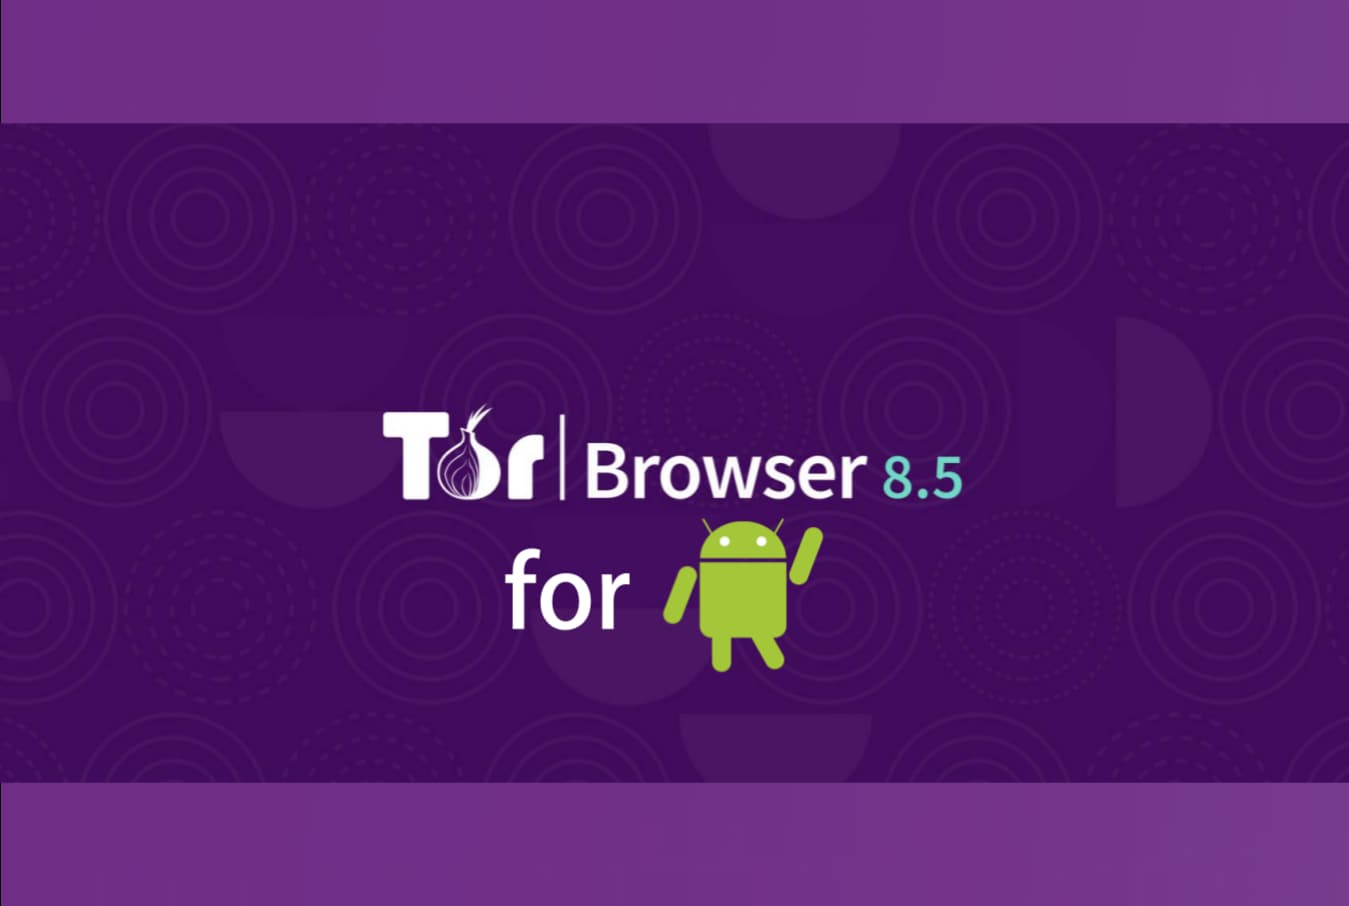 Download tor browser for android марихуана купить легально